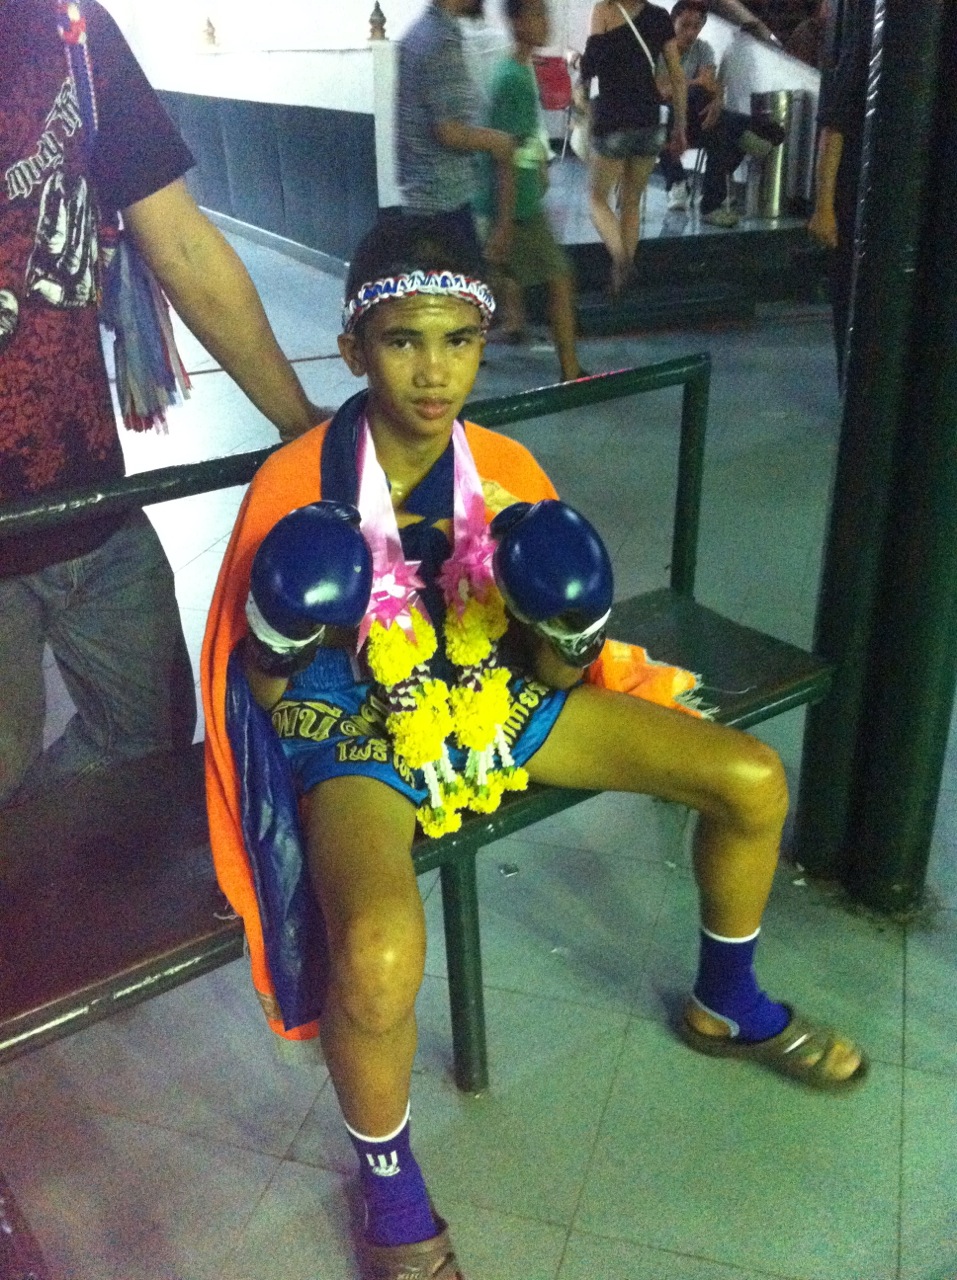 Young Parnpetch won via knockout in Round 3 in Bangla Stadium.  